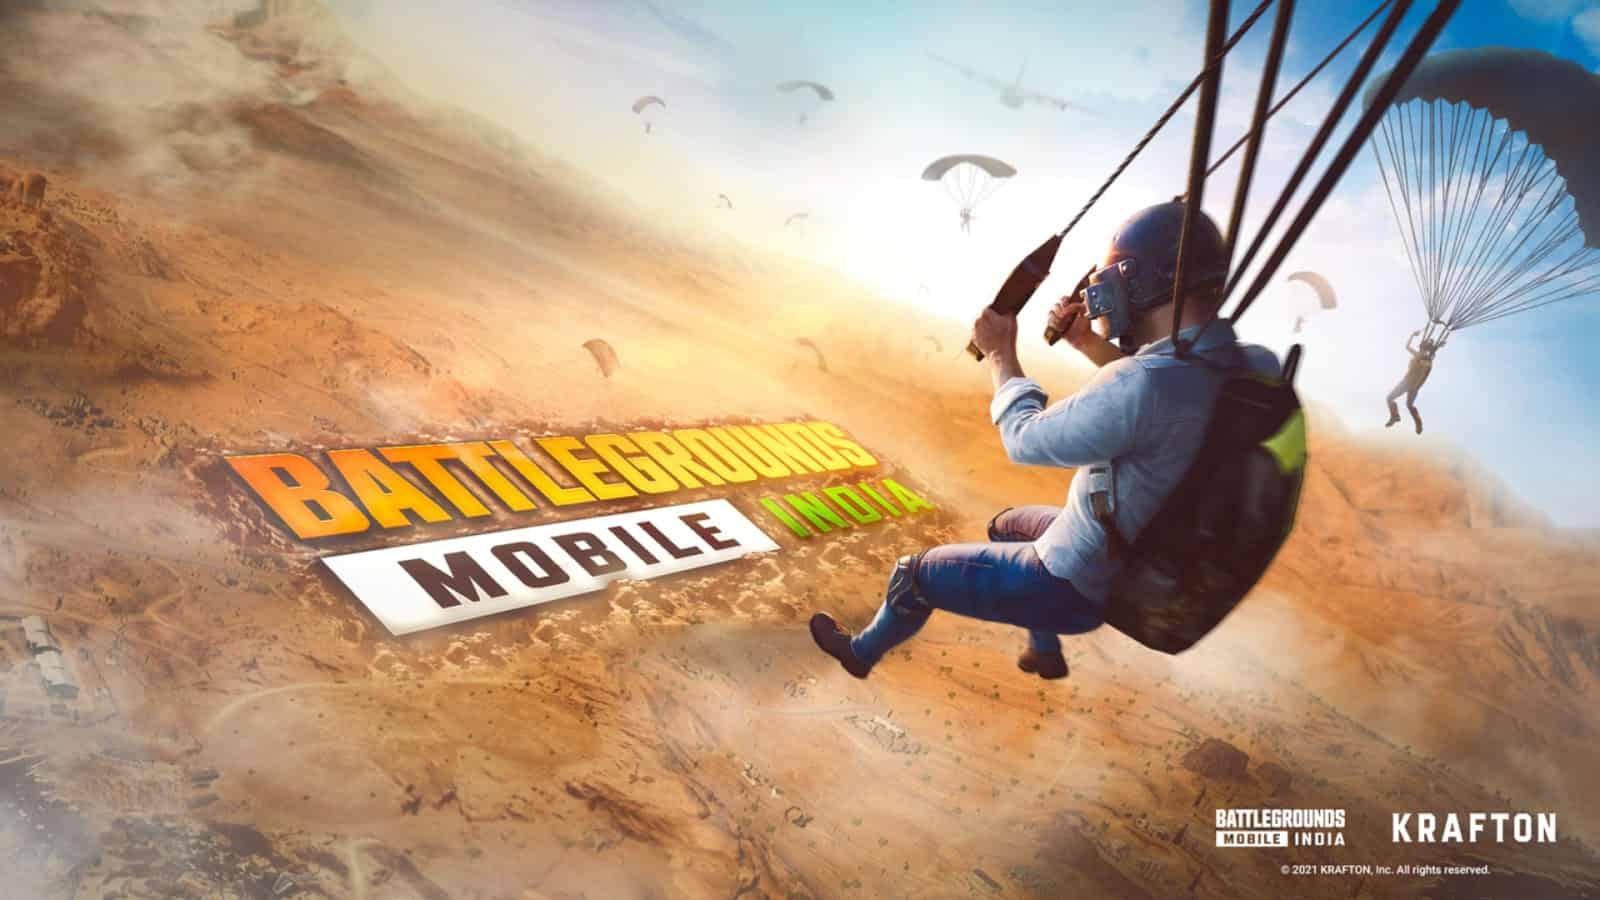 How To Migrate Data From PUBG Mobile To Battlegrounds Mobile India